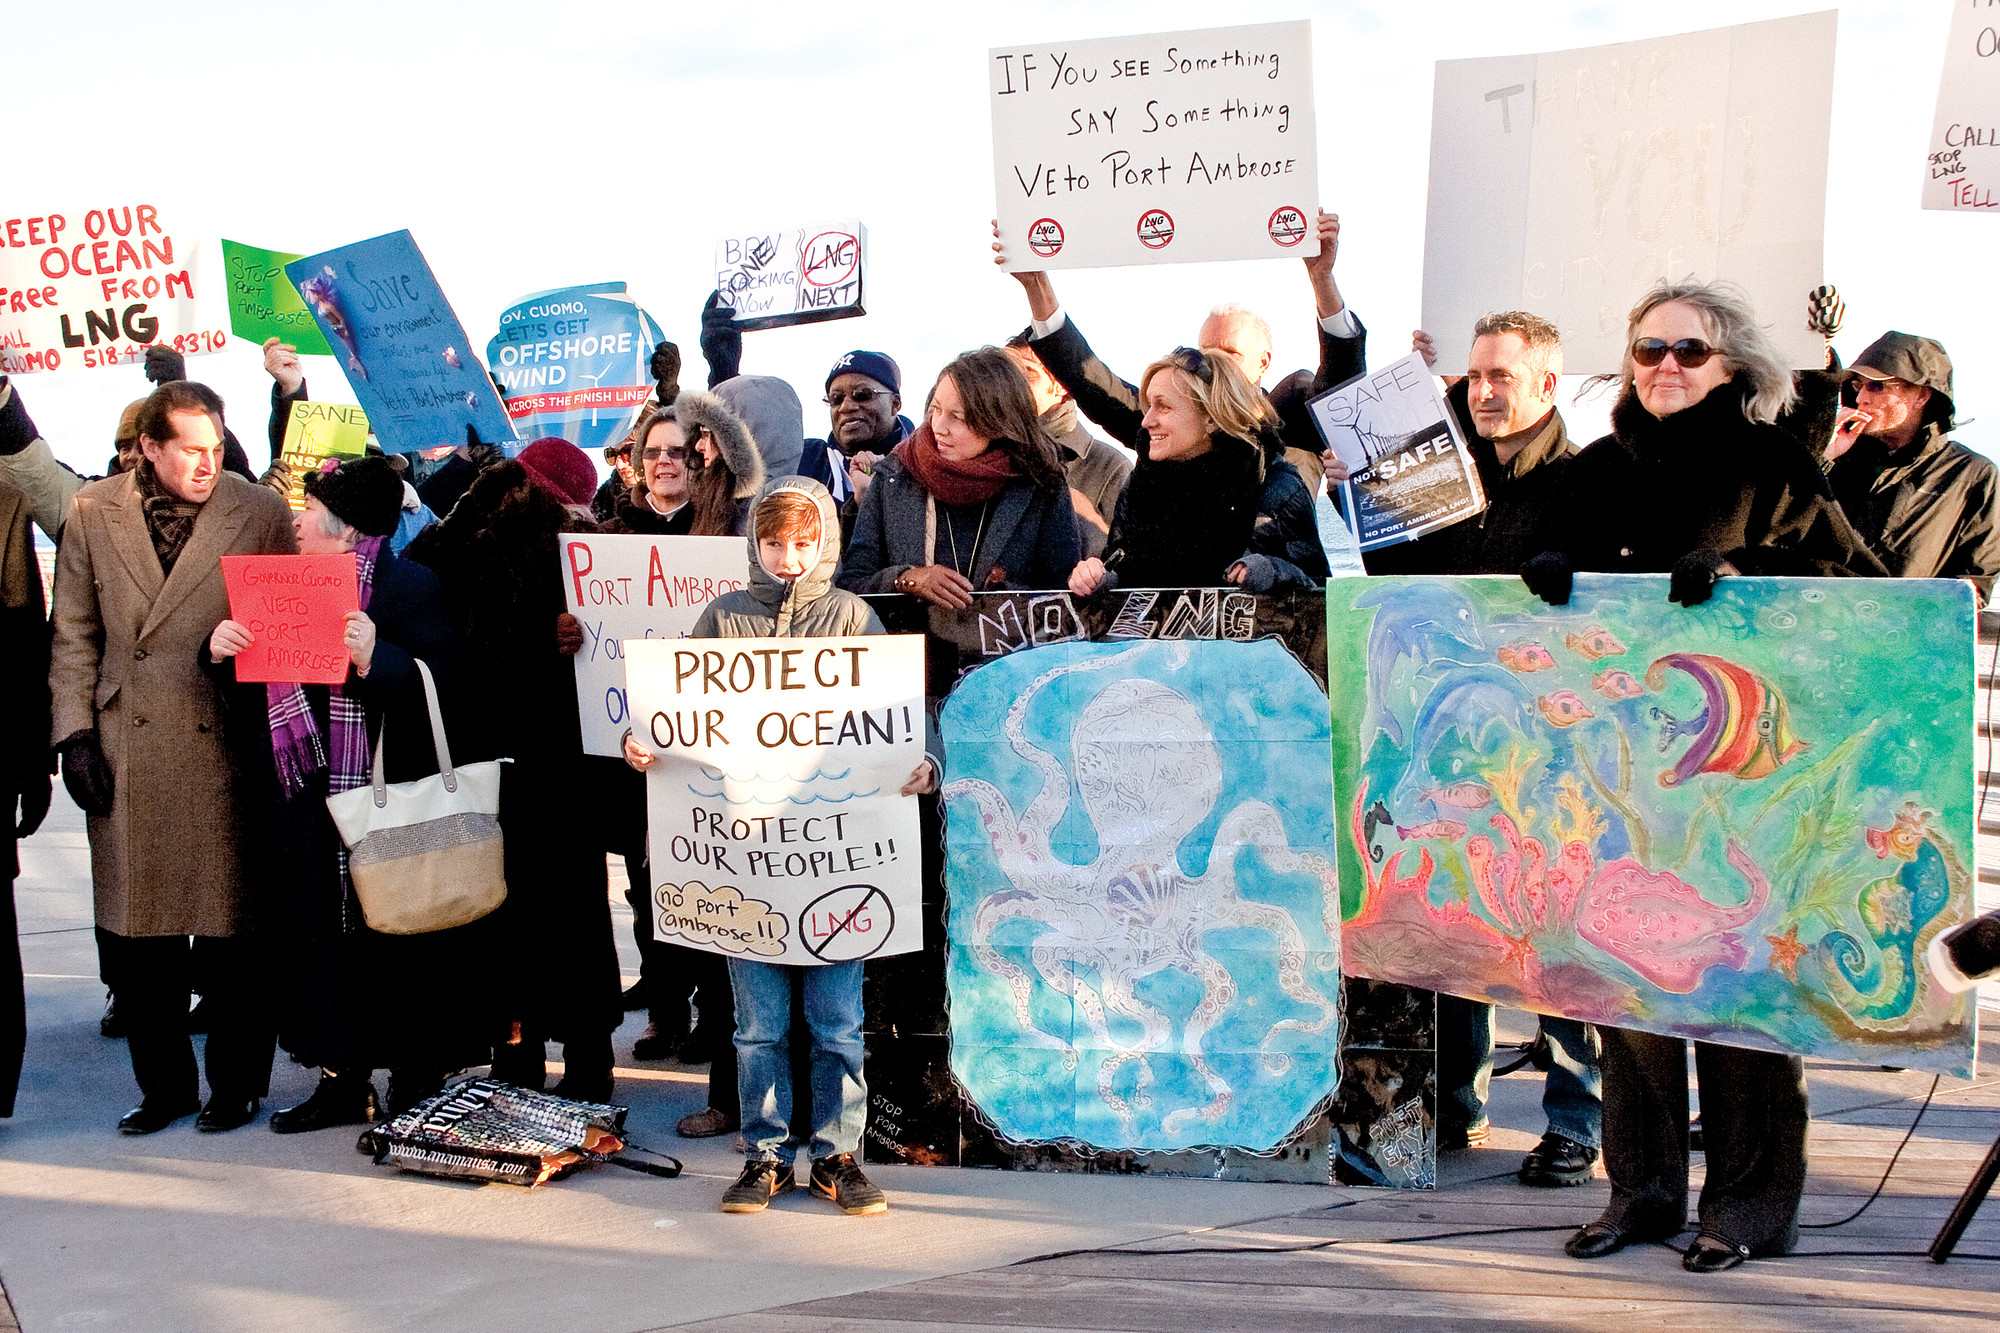 Protestors criticized the proposed Port Ambrose LNG terminal at a press conference on the boardwalk earlier this year.